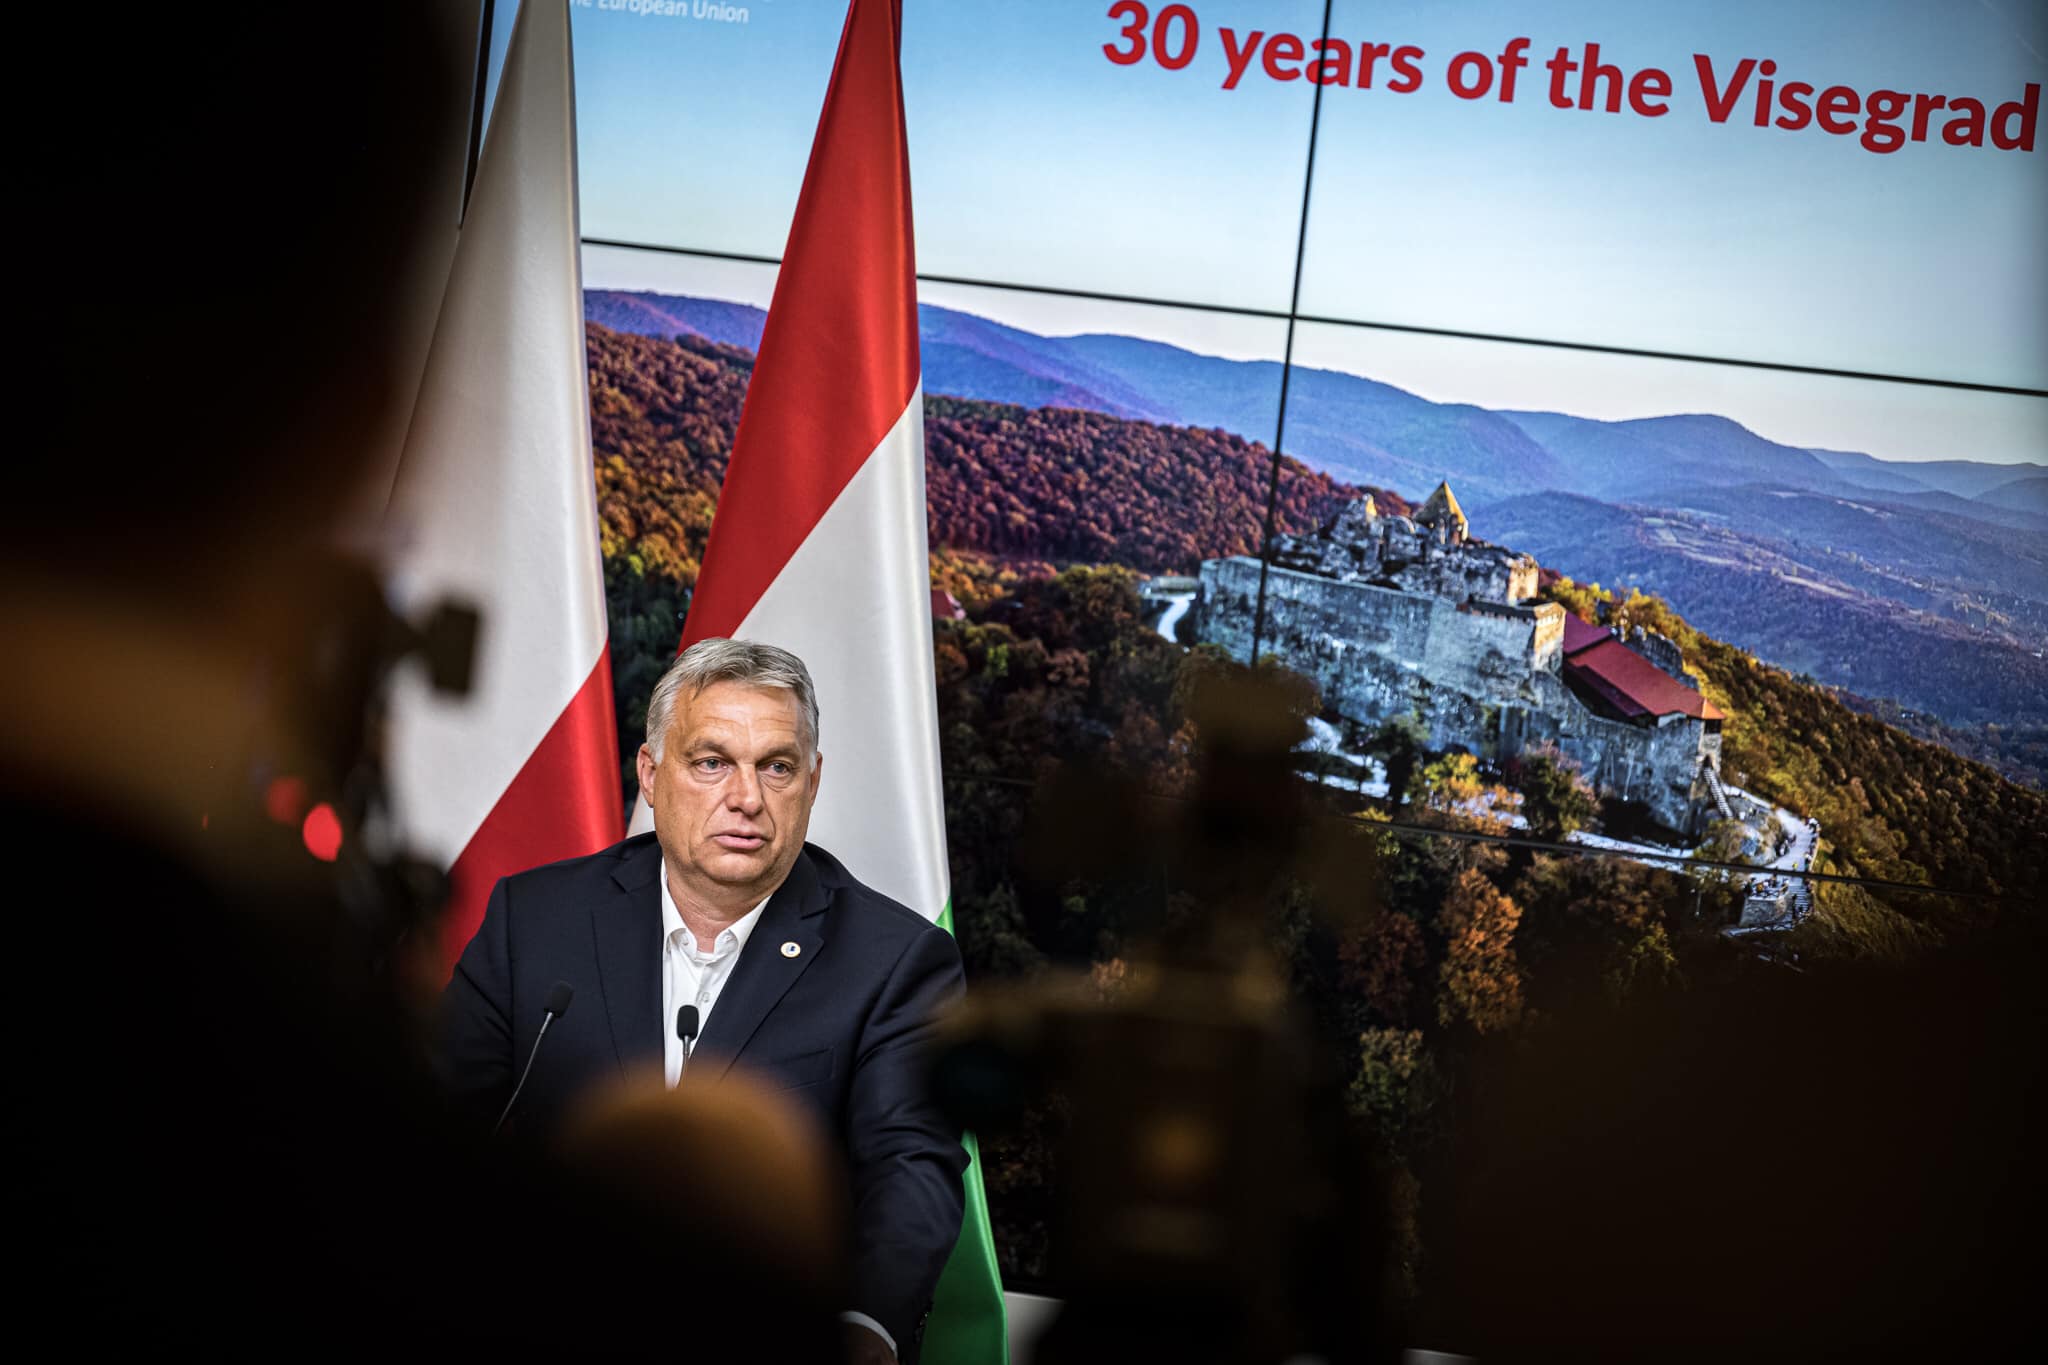 orbán fought for it